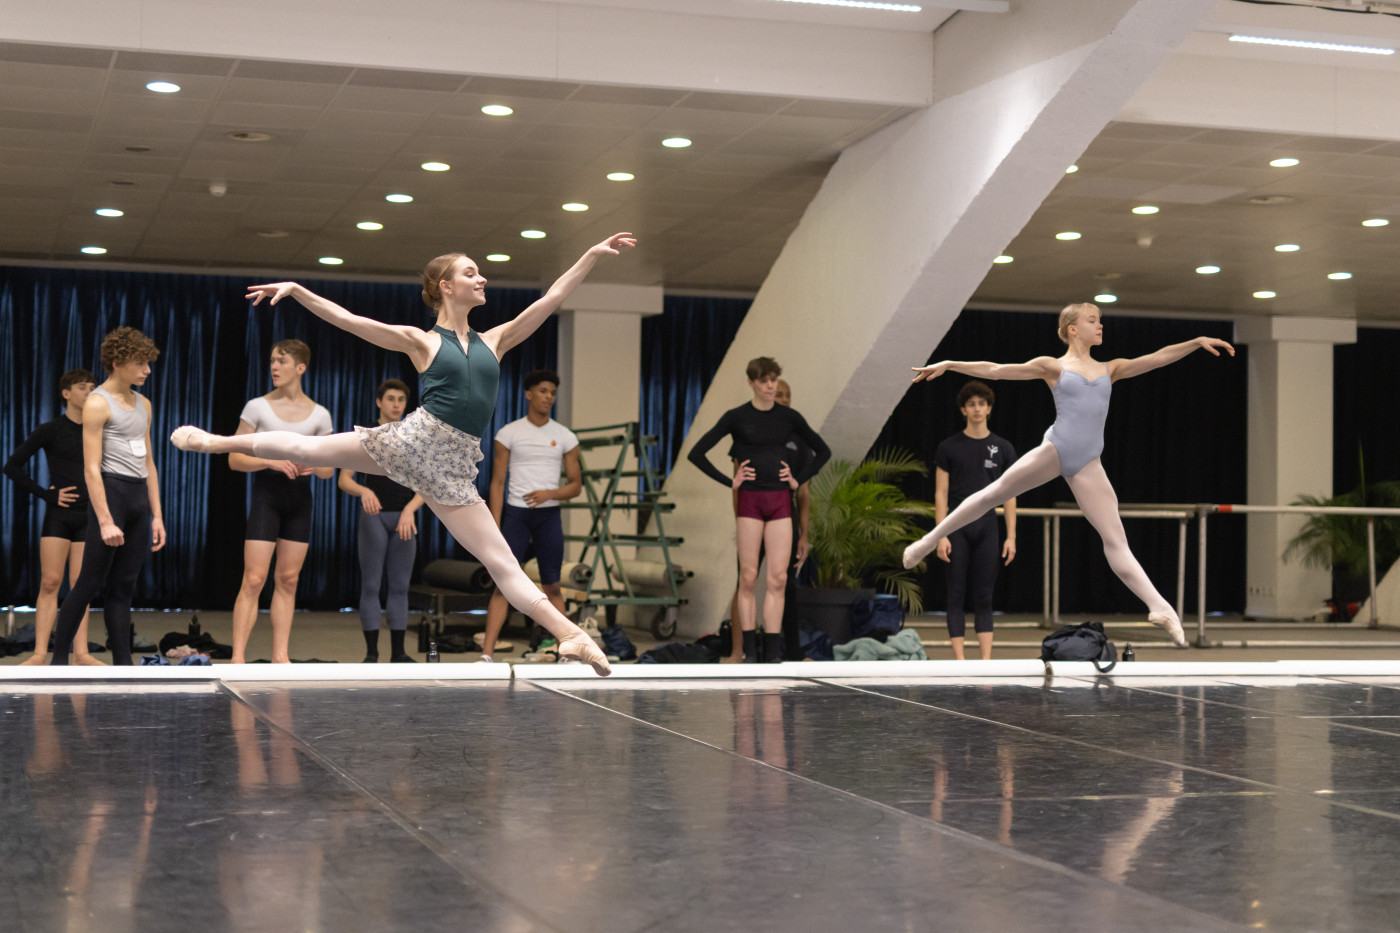 Opening of the 50th edition of Prix de Lausanne